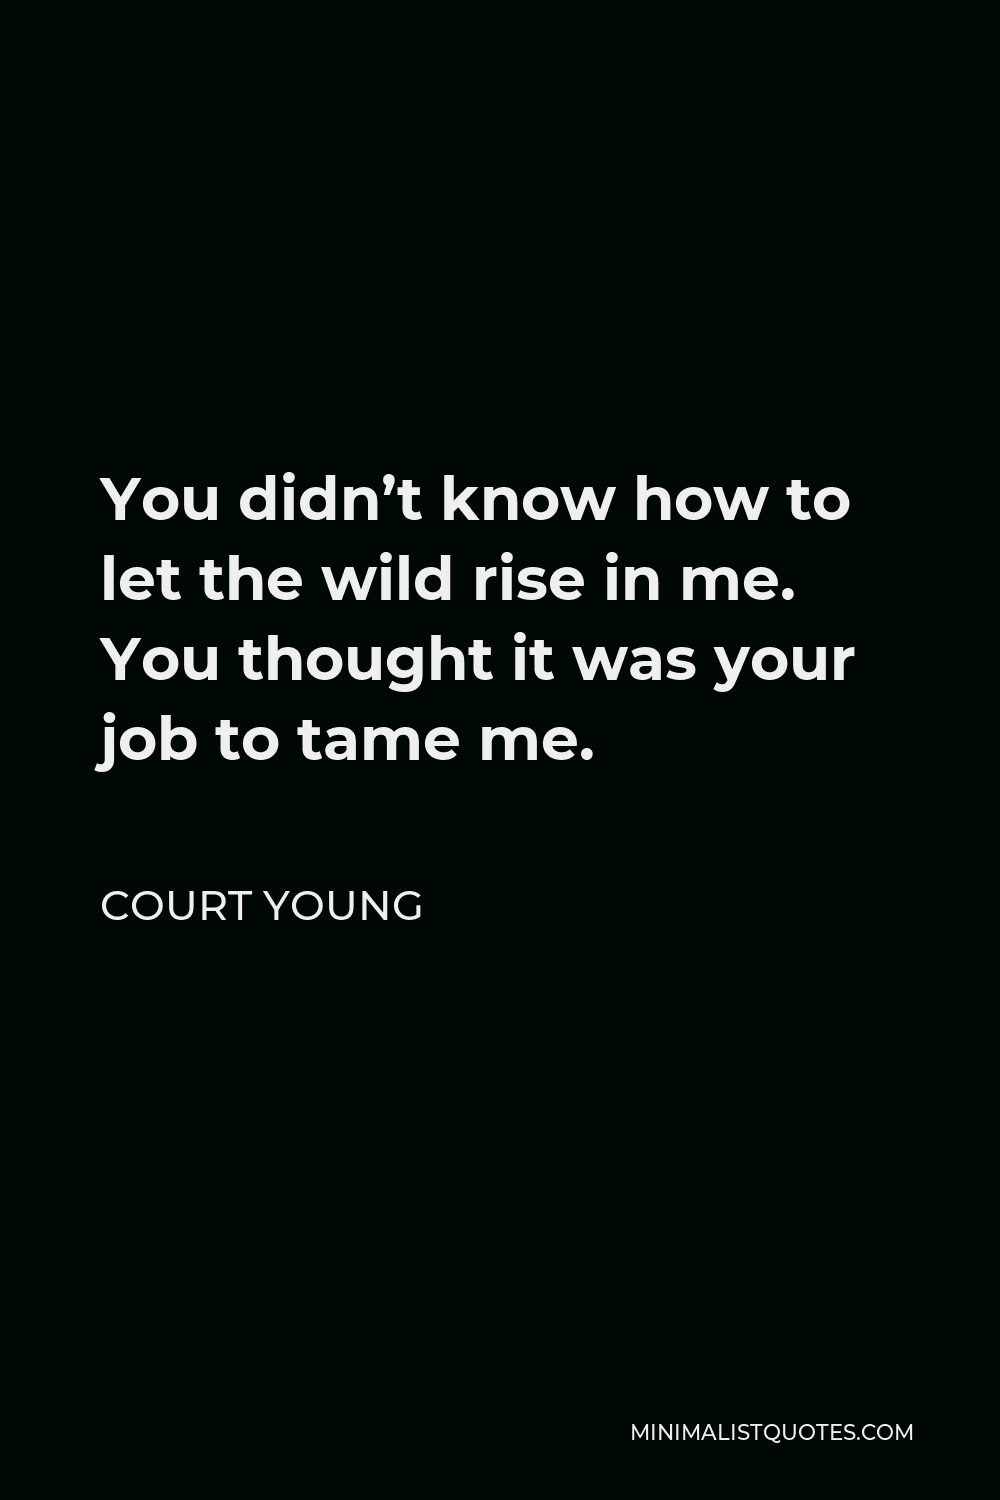 Court Young Quote - You didn’t know how to let the wild rise in me. You thought it was your job to tame me.